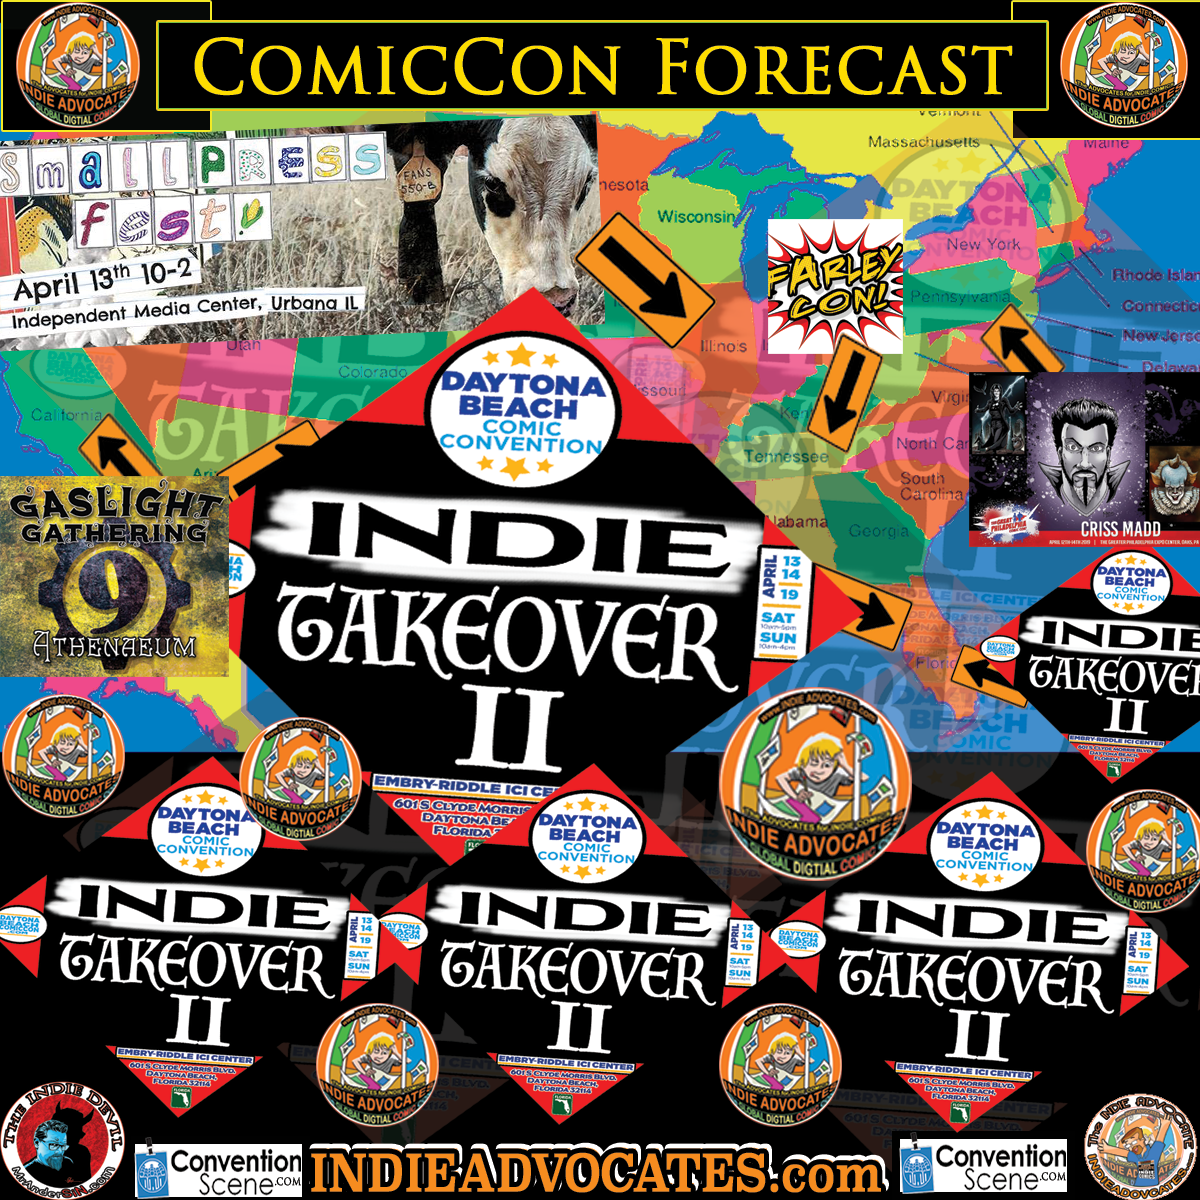 COMIC CON HIGHWAY FORECAST ::APRIL 11th-14th:: FEATURING:: –DAYTONA COMIC CON with INDIE TAKEOVER 2– :